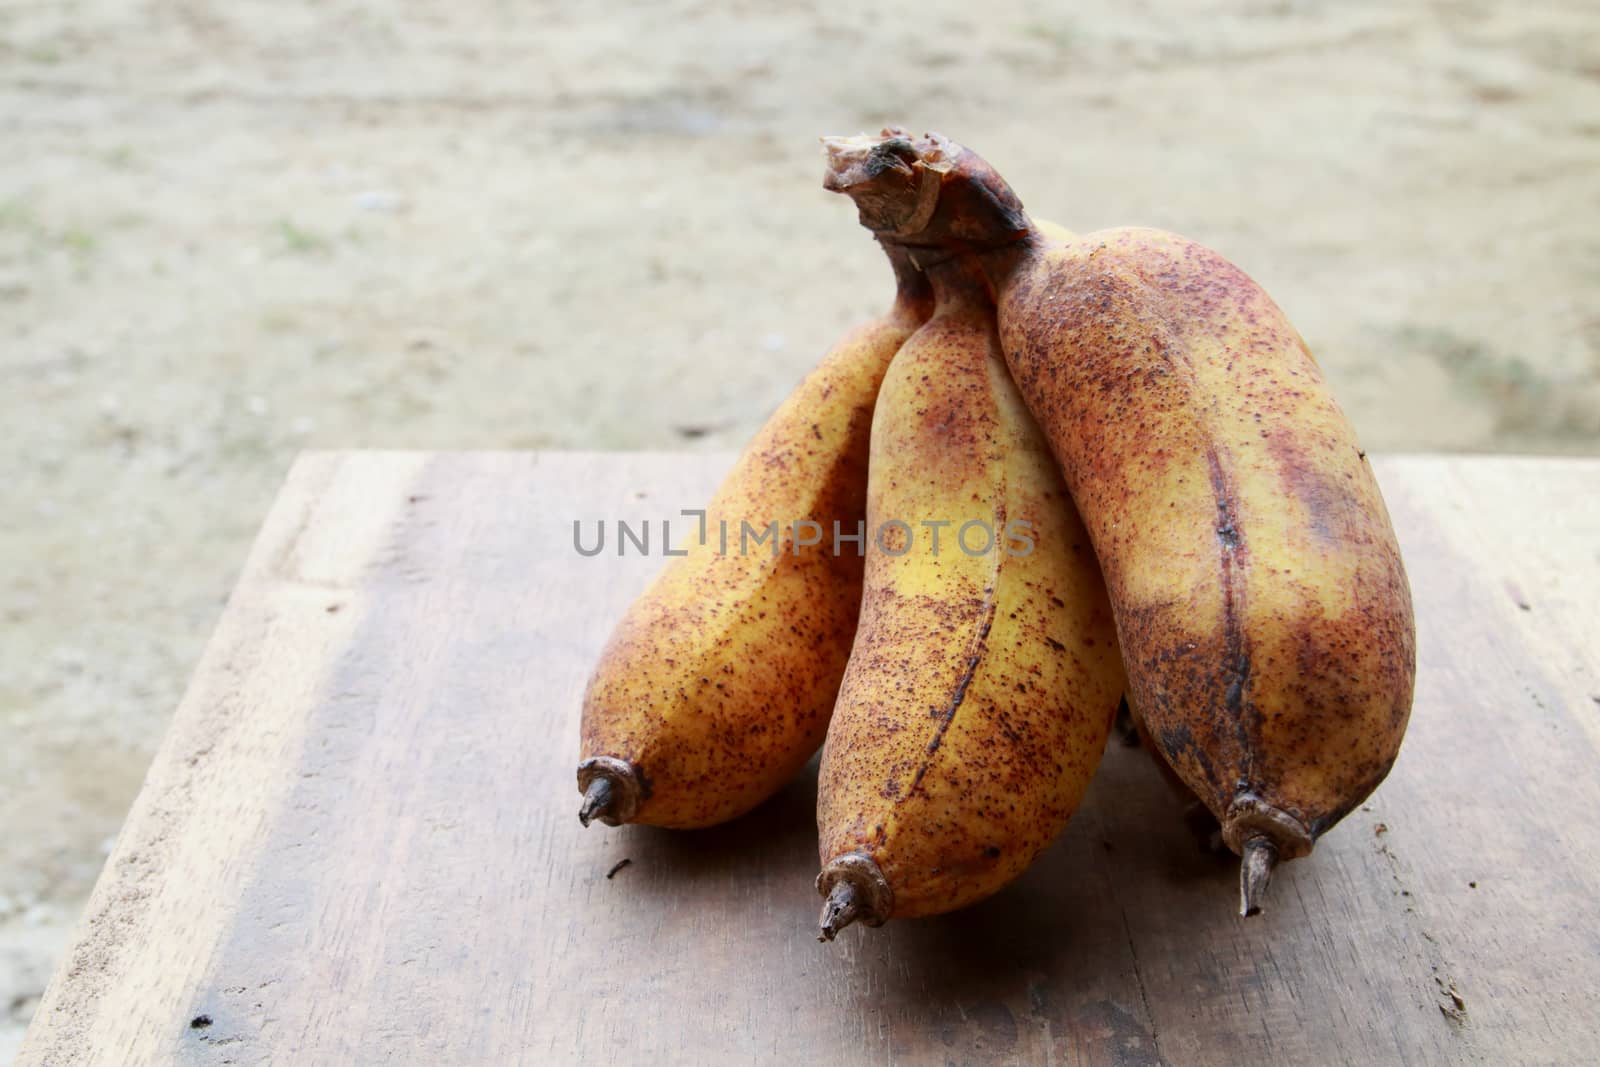 The ripen cultivated banana on thetable.